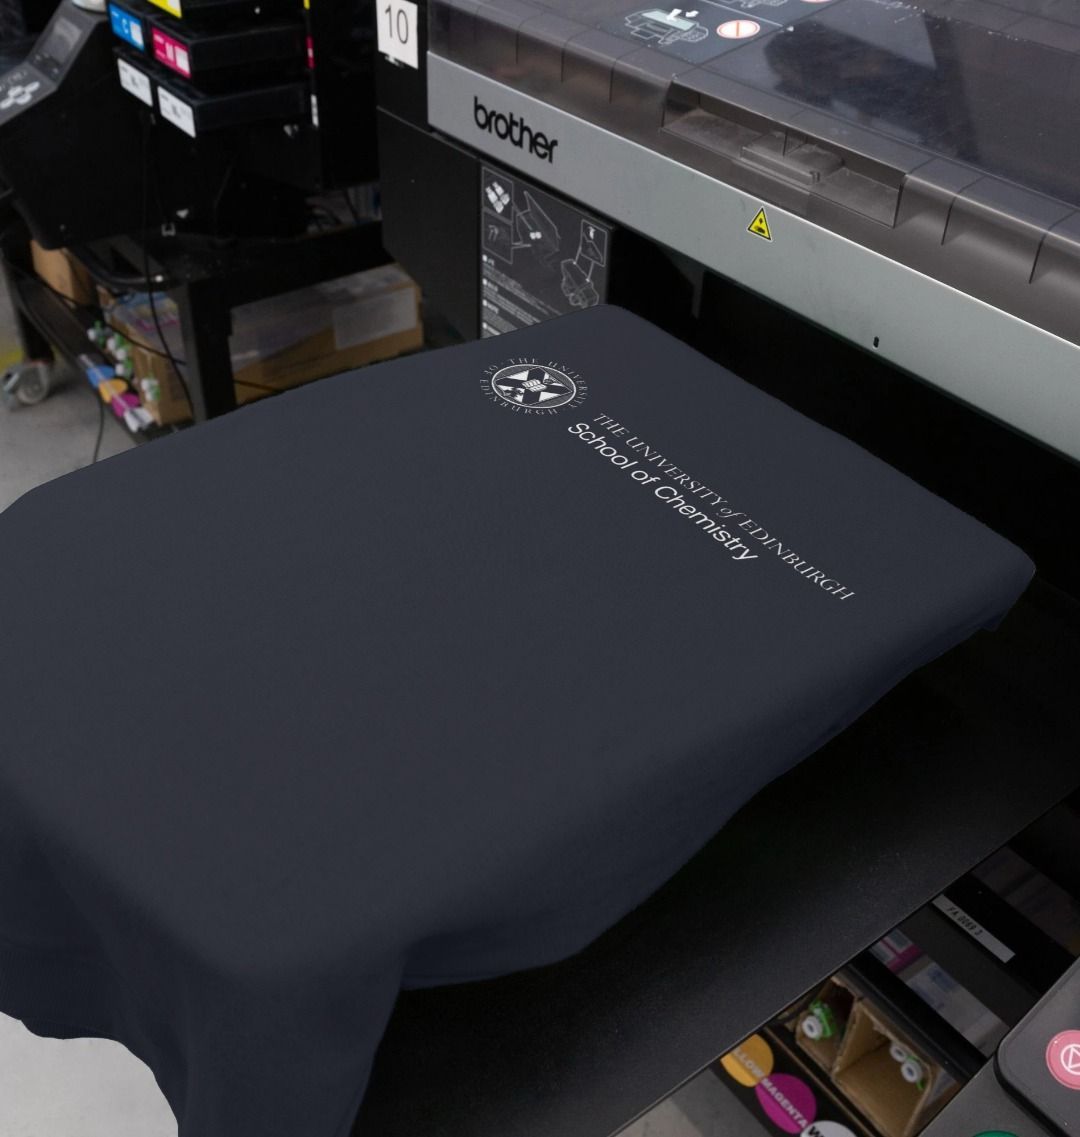 Our School of Chemistry navy sweatshirt being printed at our on demand partner, Teemill.